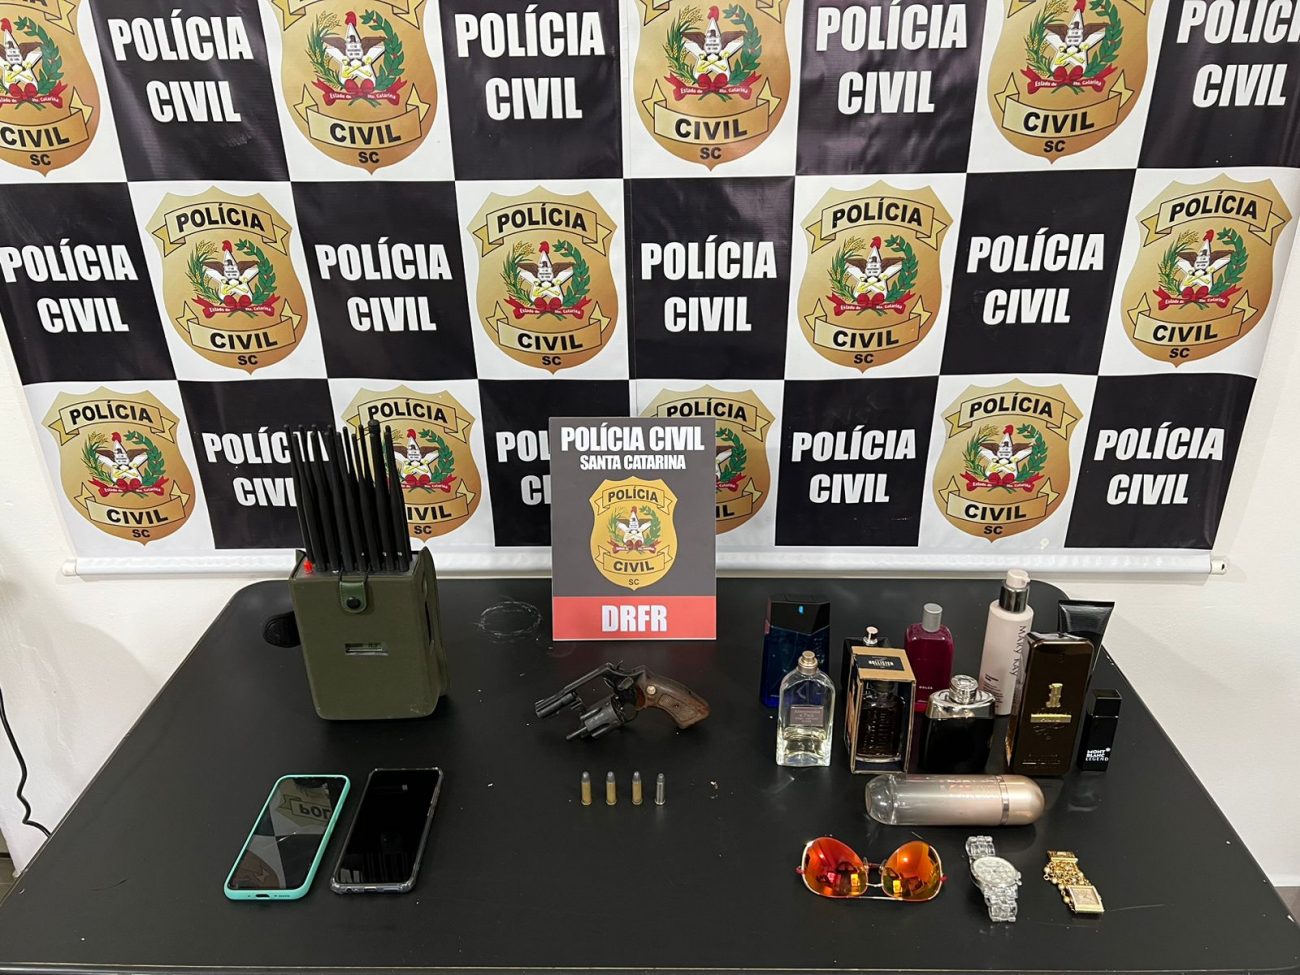 The stolen products were recovered by Civil Police on Tuesday (10) - Civil Police/Disclosure/ND